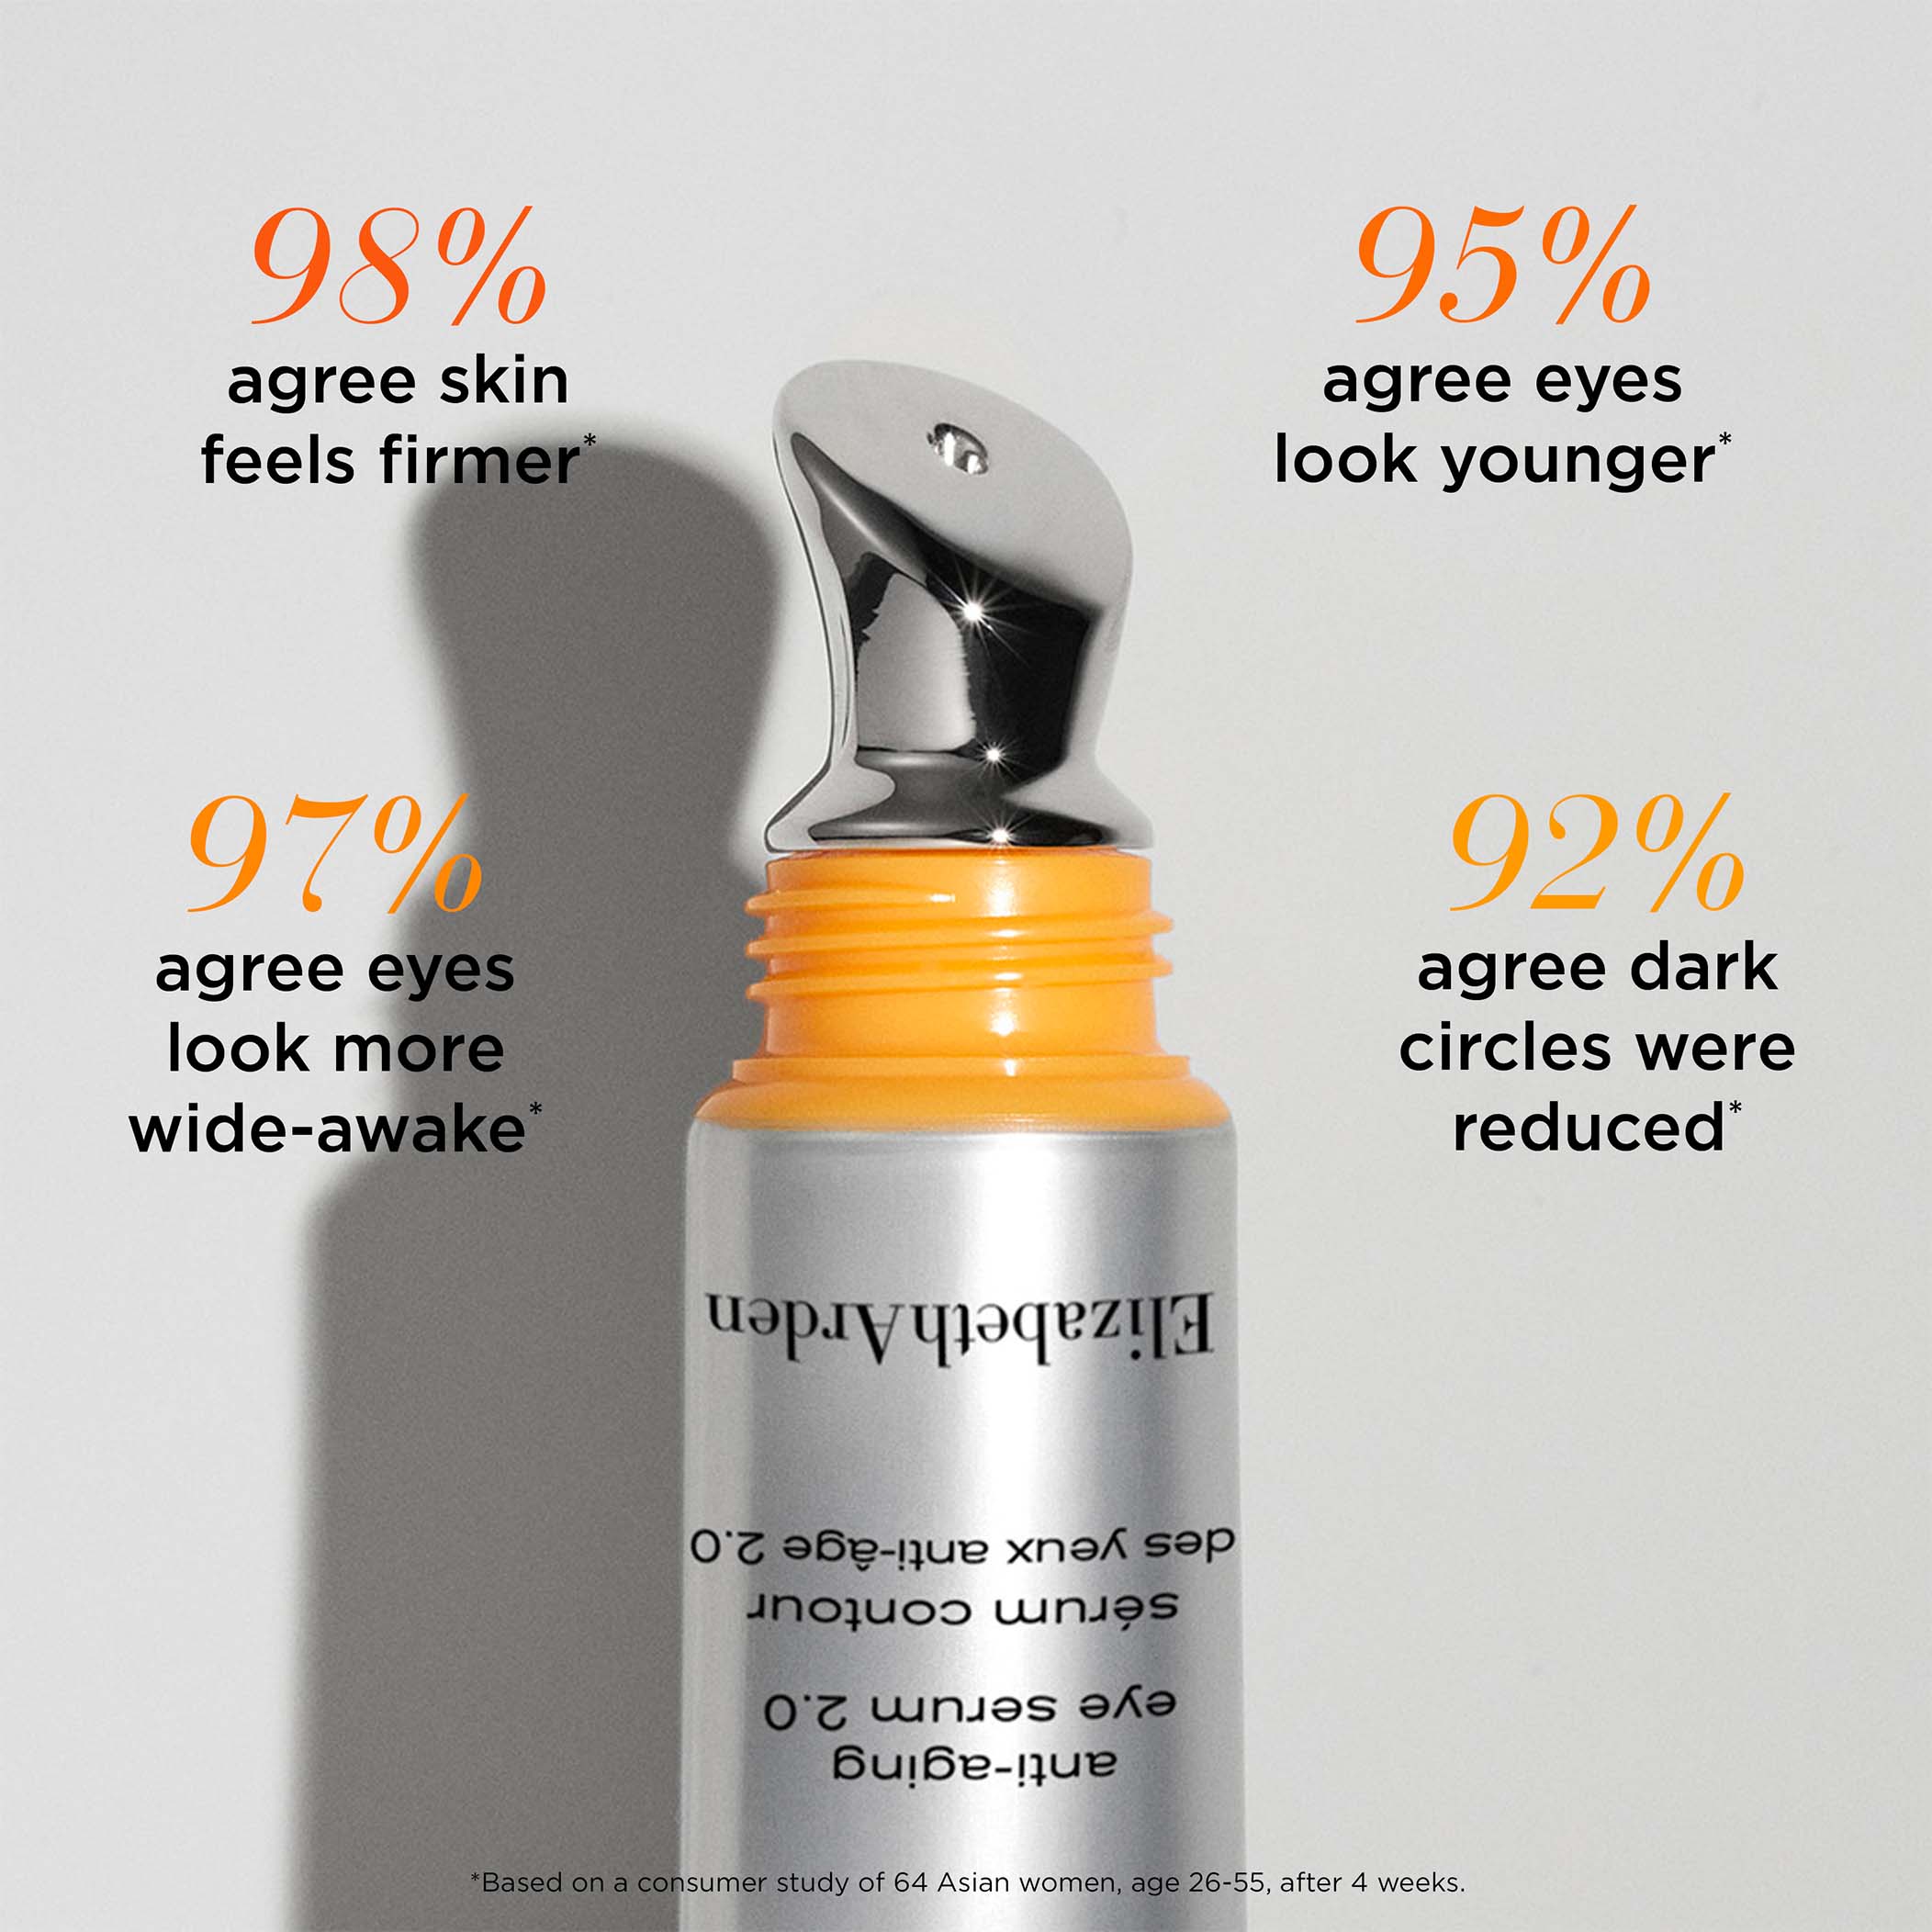 98% agree skin feels firmer, 97% agree eyes look more wide-awake, 95% agree eyes look younger and 92% agree dark circles were reduced based on a consumer study of 64 Asian women, ages 26-55, after 4 weeks.